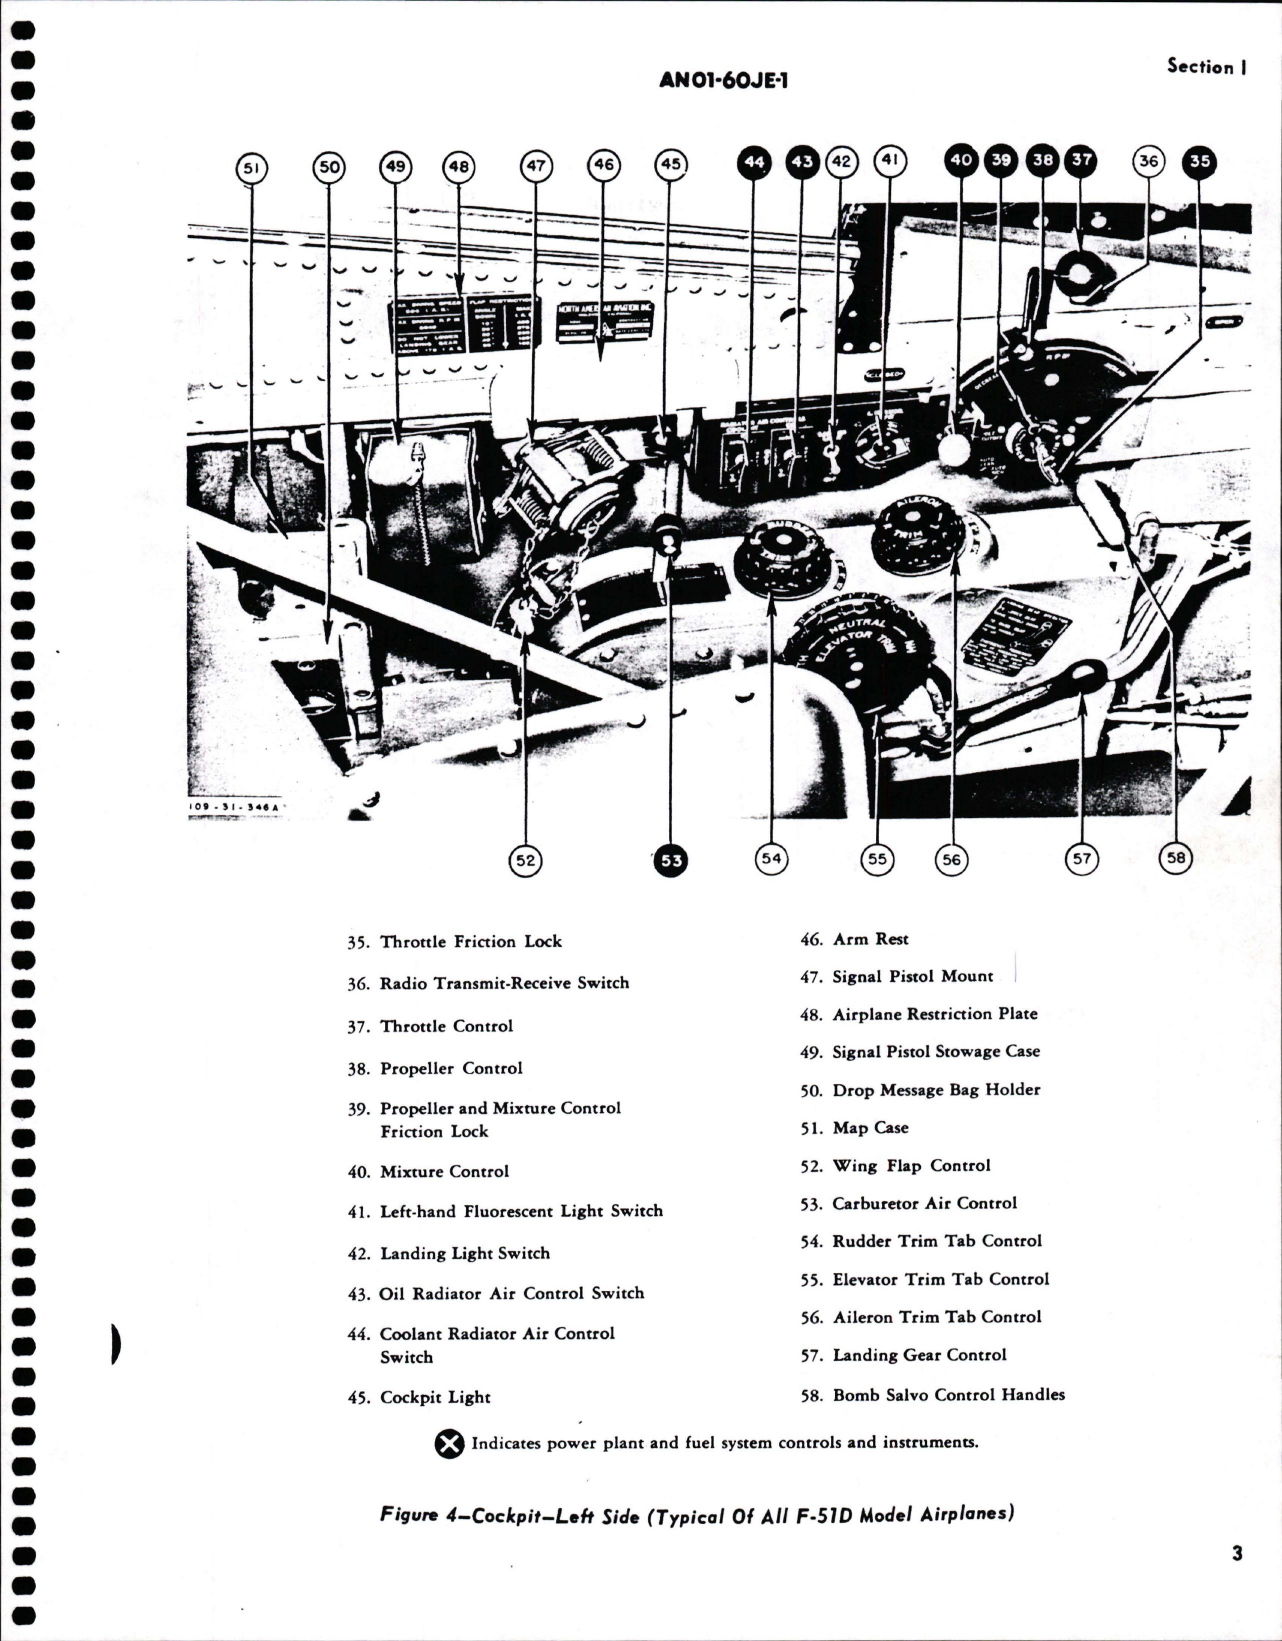 Sample page 9 from AirCorps Library document: Flight Operating Instructions for F-51D and TF-51D